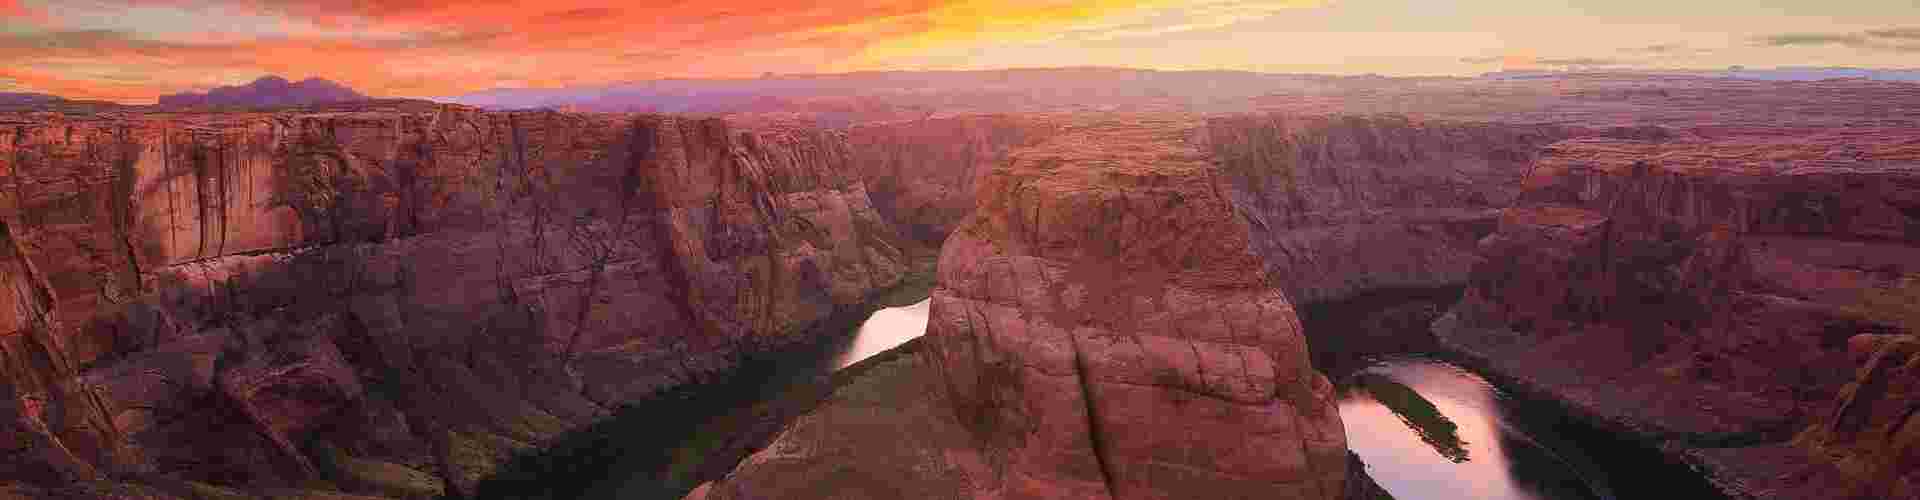 The natural formation of horseshoe bend at sunset in Arizona 